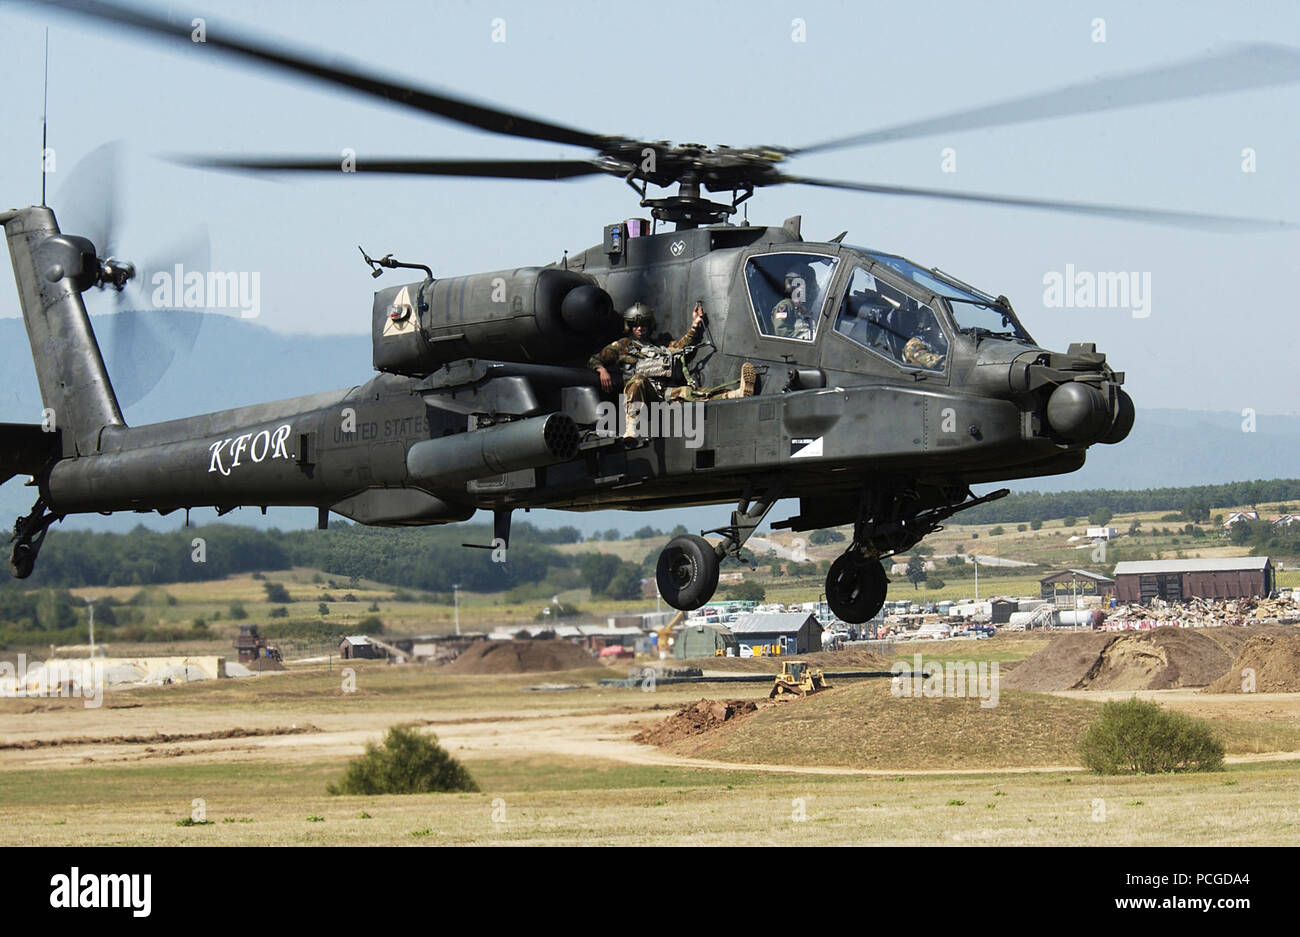 Capt. Sean Spence, the commander of B Co. TF Eagle, rides shotgun on an AH-64 Apache during an Apache extraction exercise Aug. 25 at Camp Bondsteel, Kosovo. Stock Photo